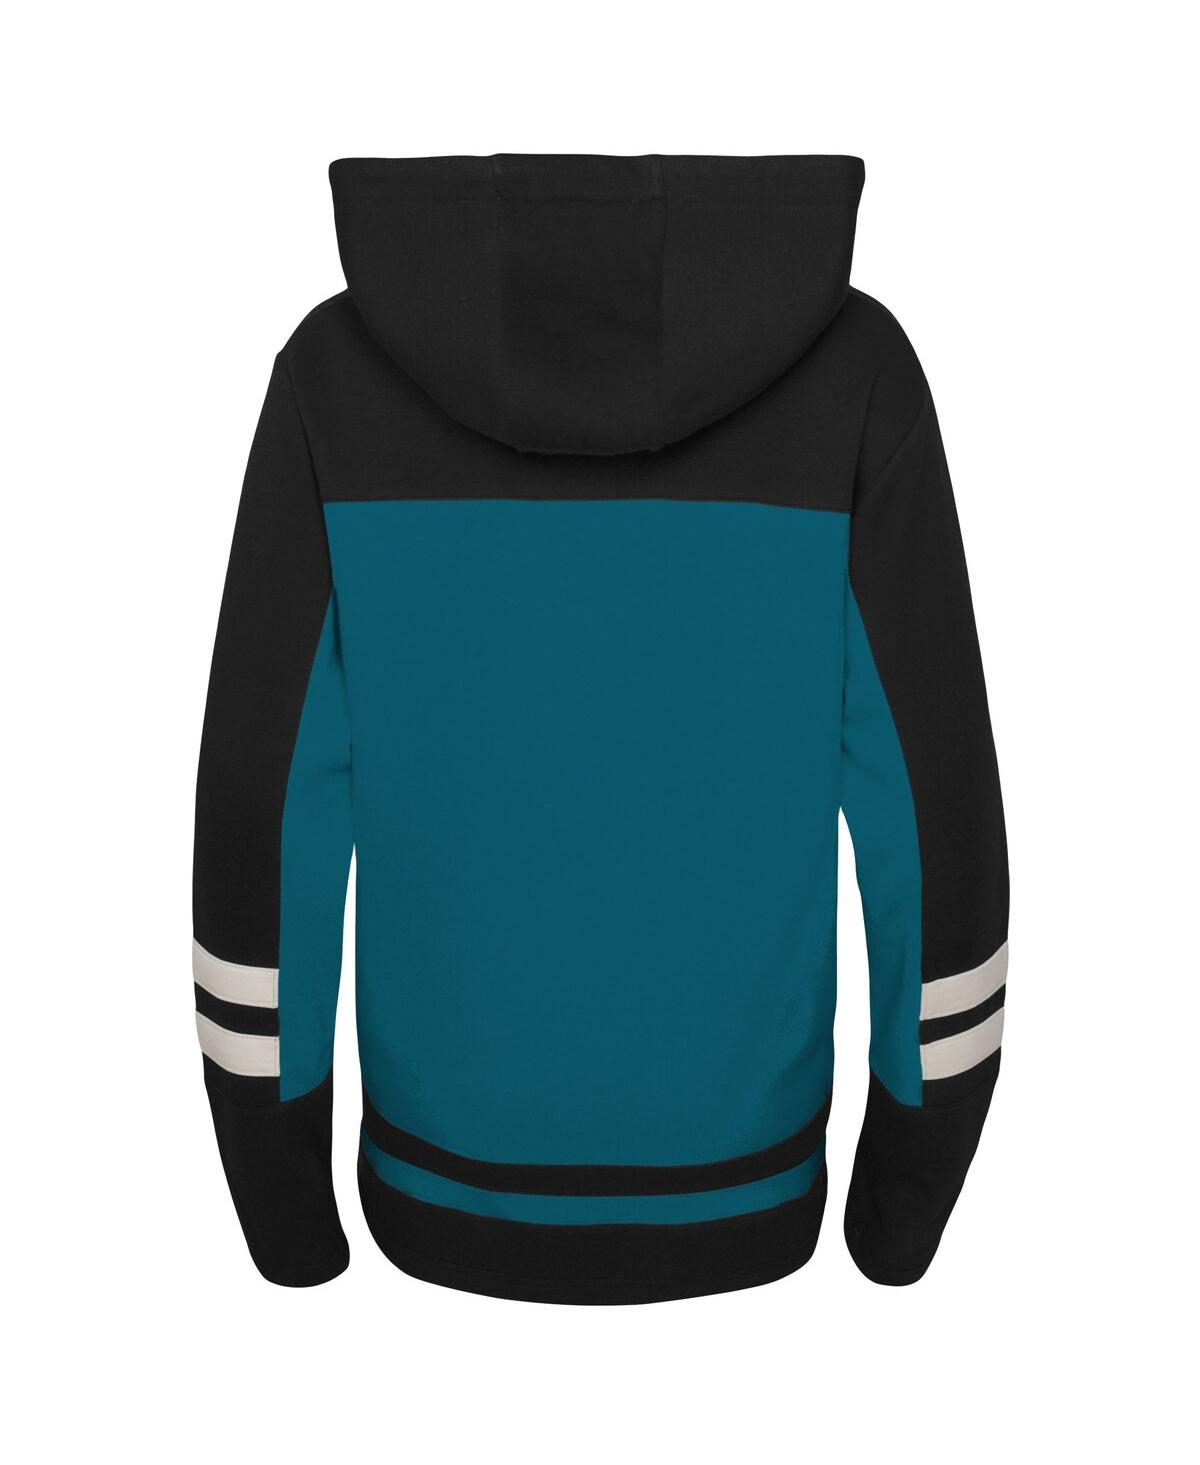 Shop Outerstuff Big Boys Teal San Jose Sharks Ageless Revisited Home Lace-up Pullover Hoodie